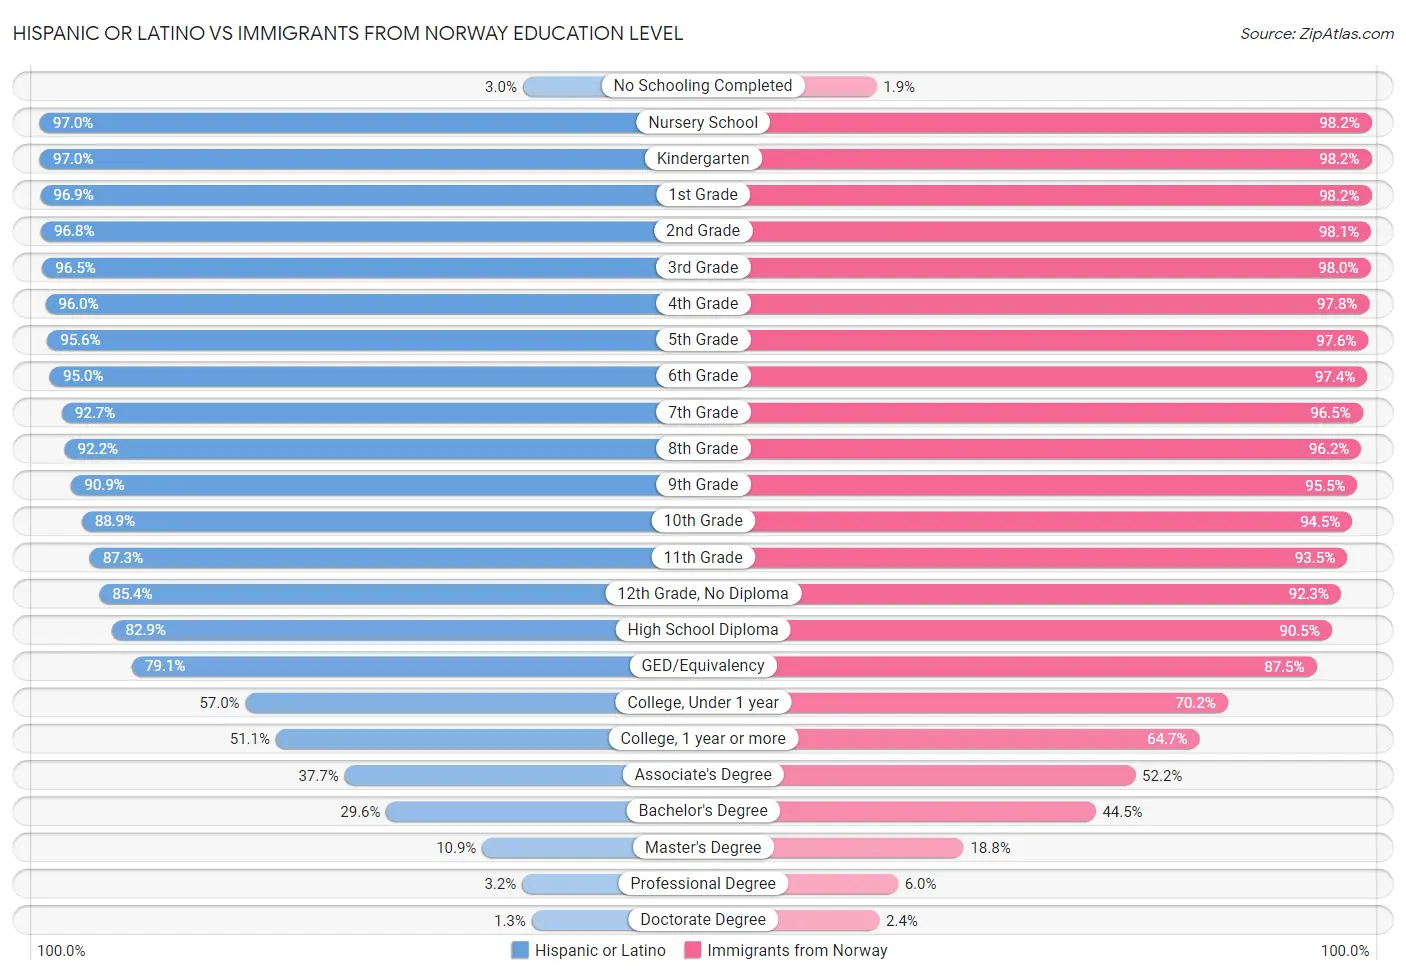 Hispanic or Latino vs Immigrants from Norway Education Level